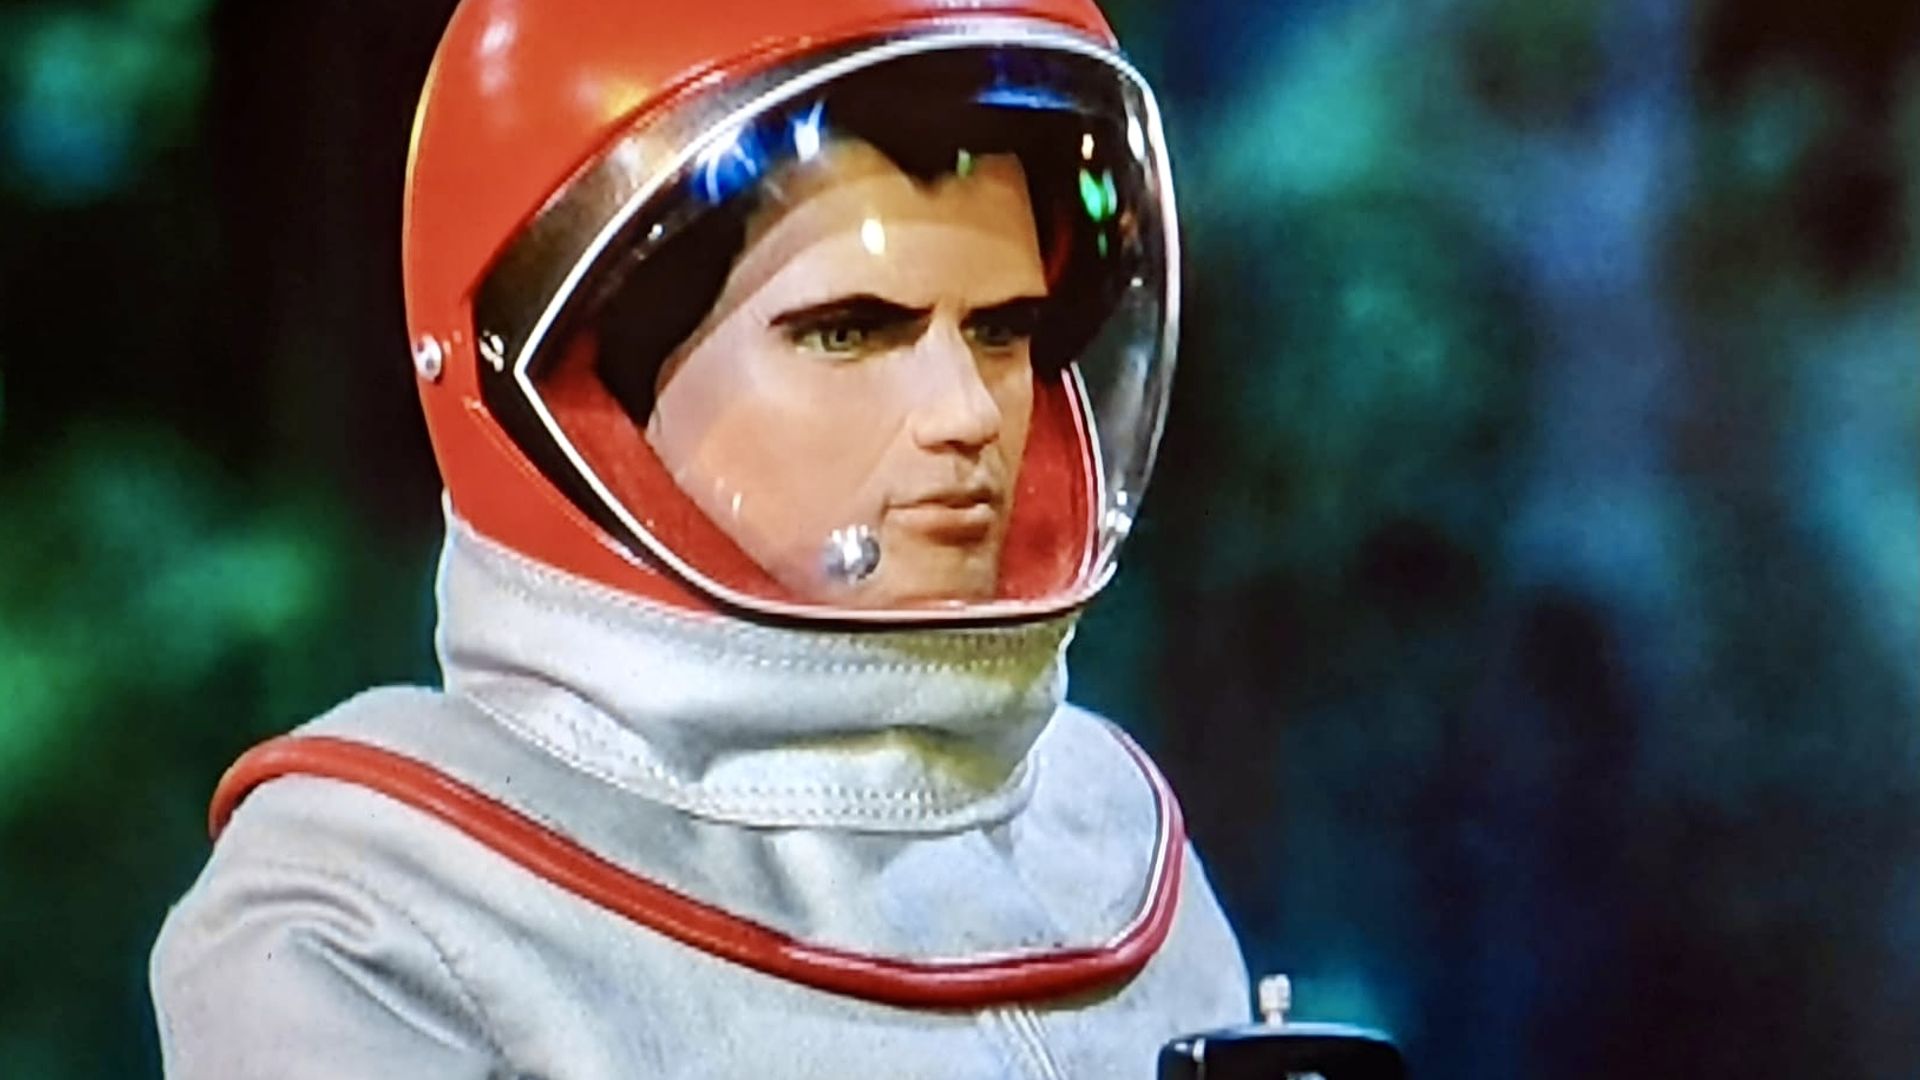 Captain Scarlet and the Mysterons background